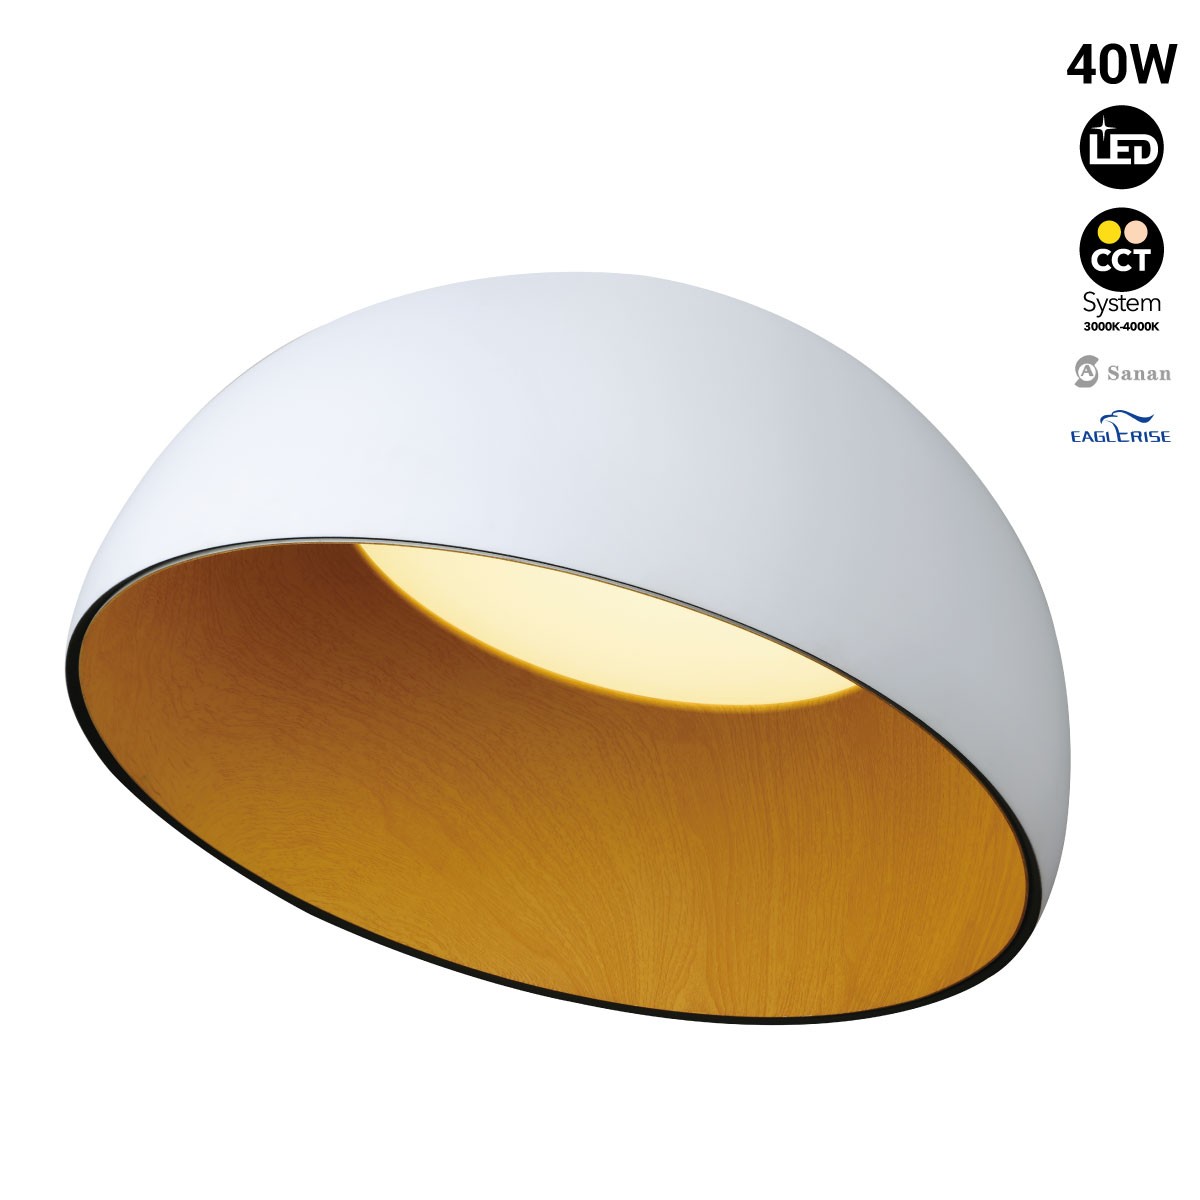 Ceiling lamp INCLINED LED 40W CCT 3000K-4000K - Wood Effect